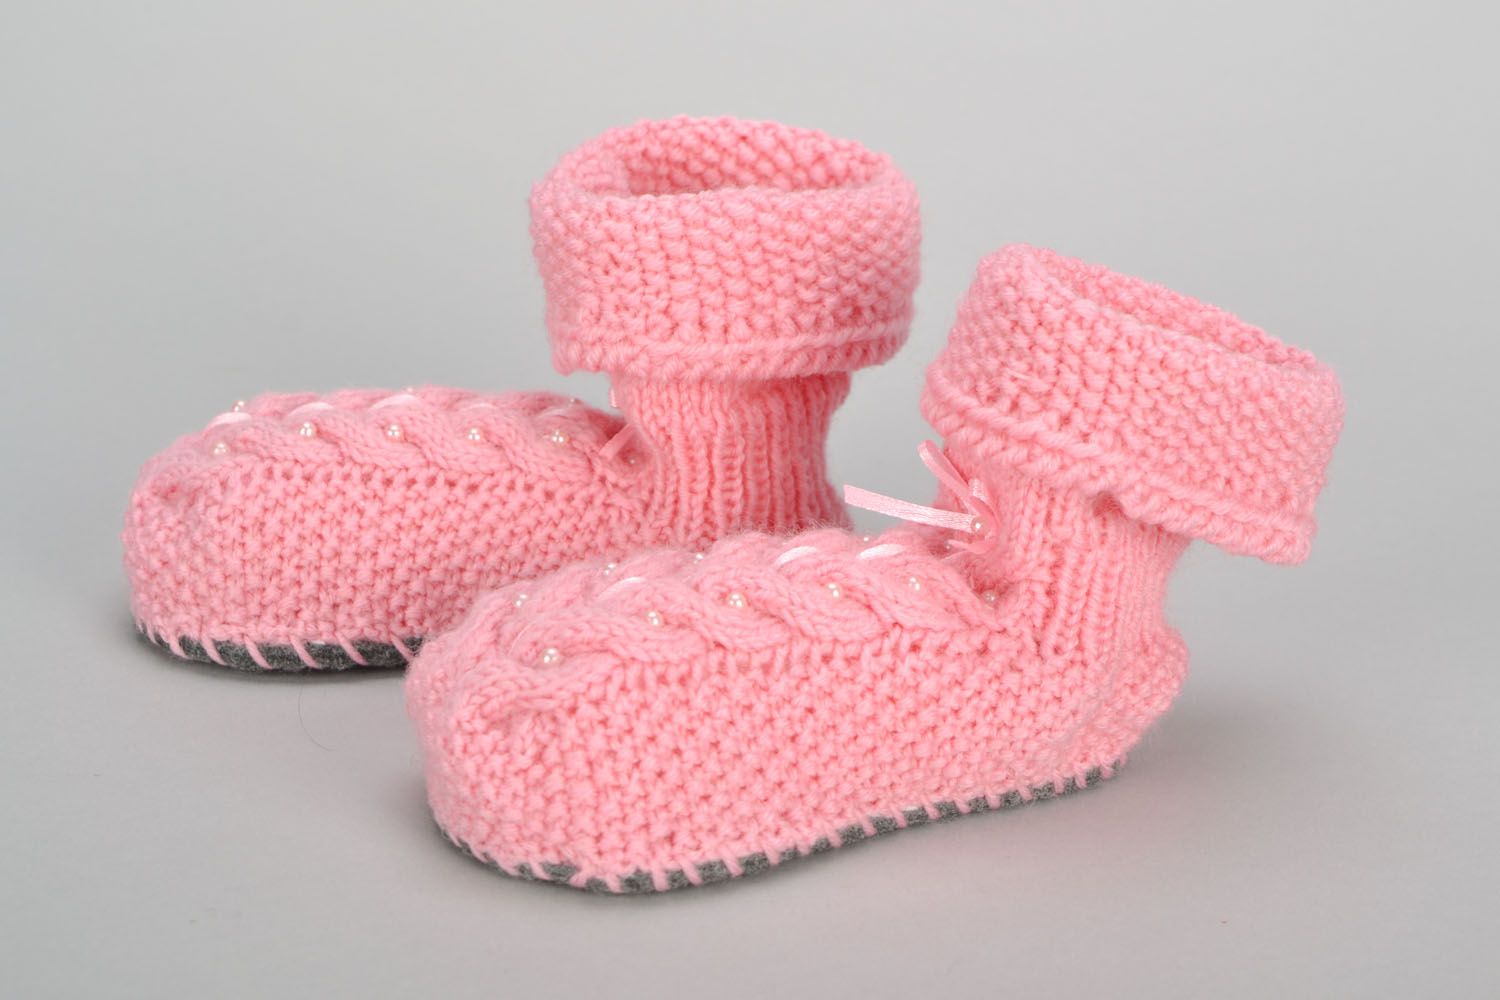 Crochet baby shoes photo 4